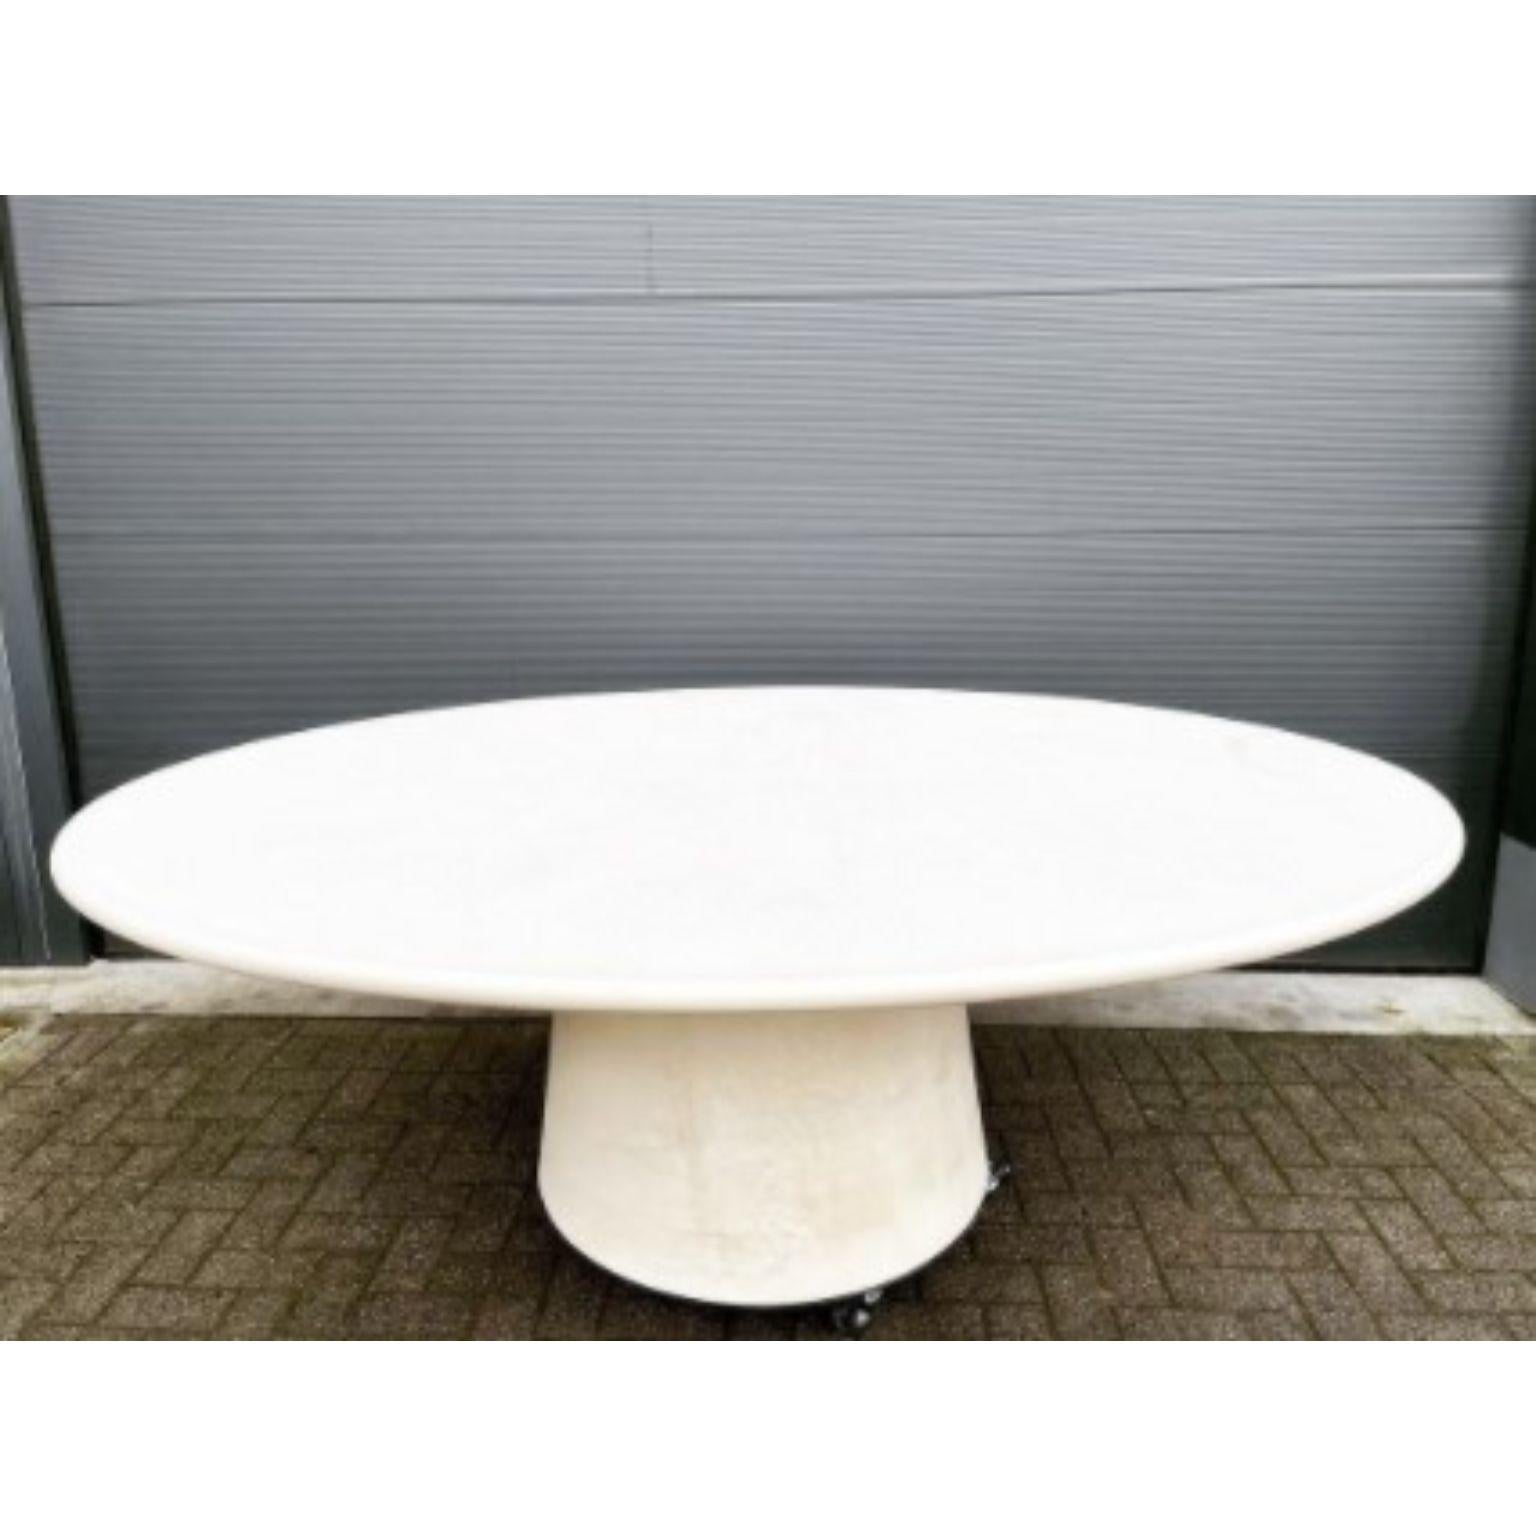 Handmade outdoor dining table 200 by Philippe Colette
Dimensions: Ø200 / 10 pers.
Customized height
Materials: Mineral lime plaster.

All shapes / sizes can be customized. Wide range of colors.

Our tables are in mineral lime plaster, unlike